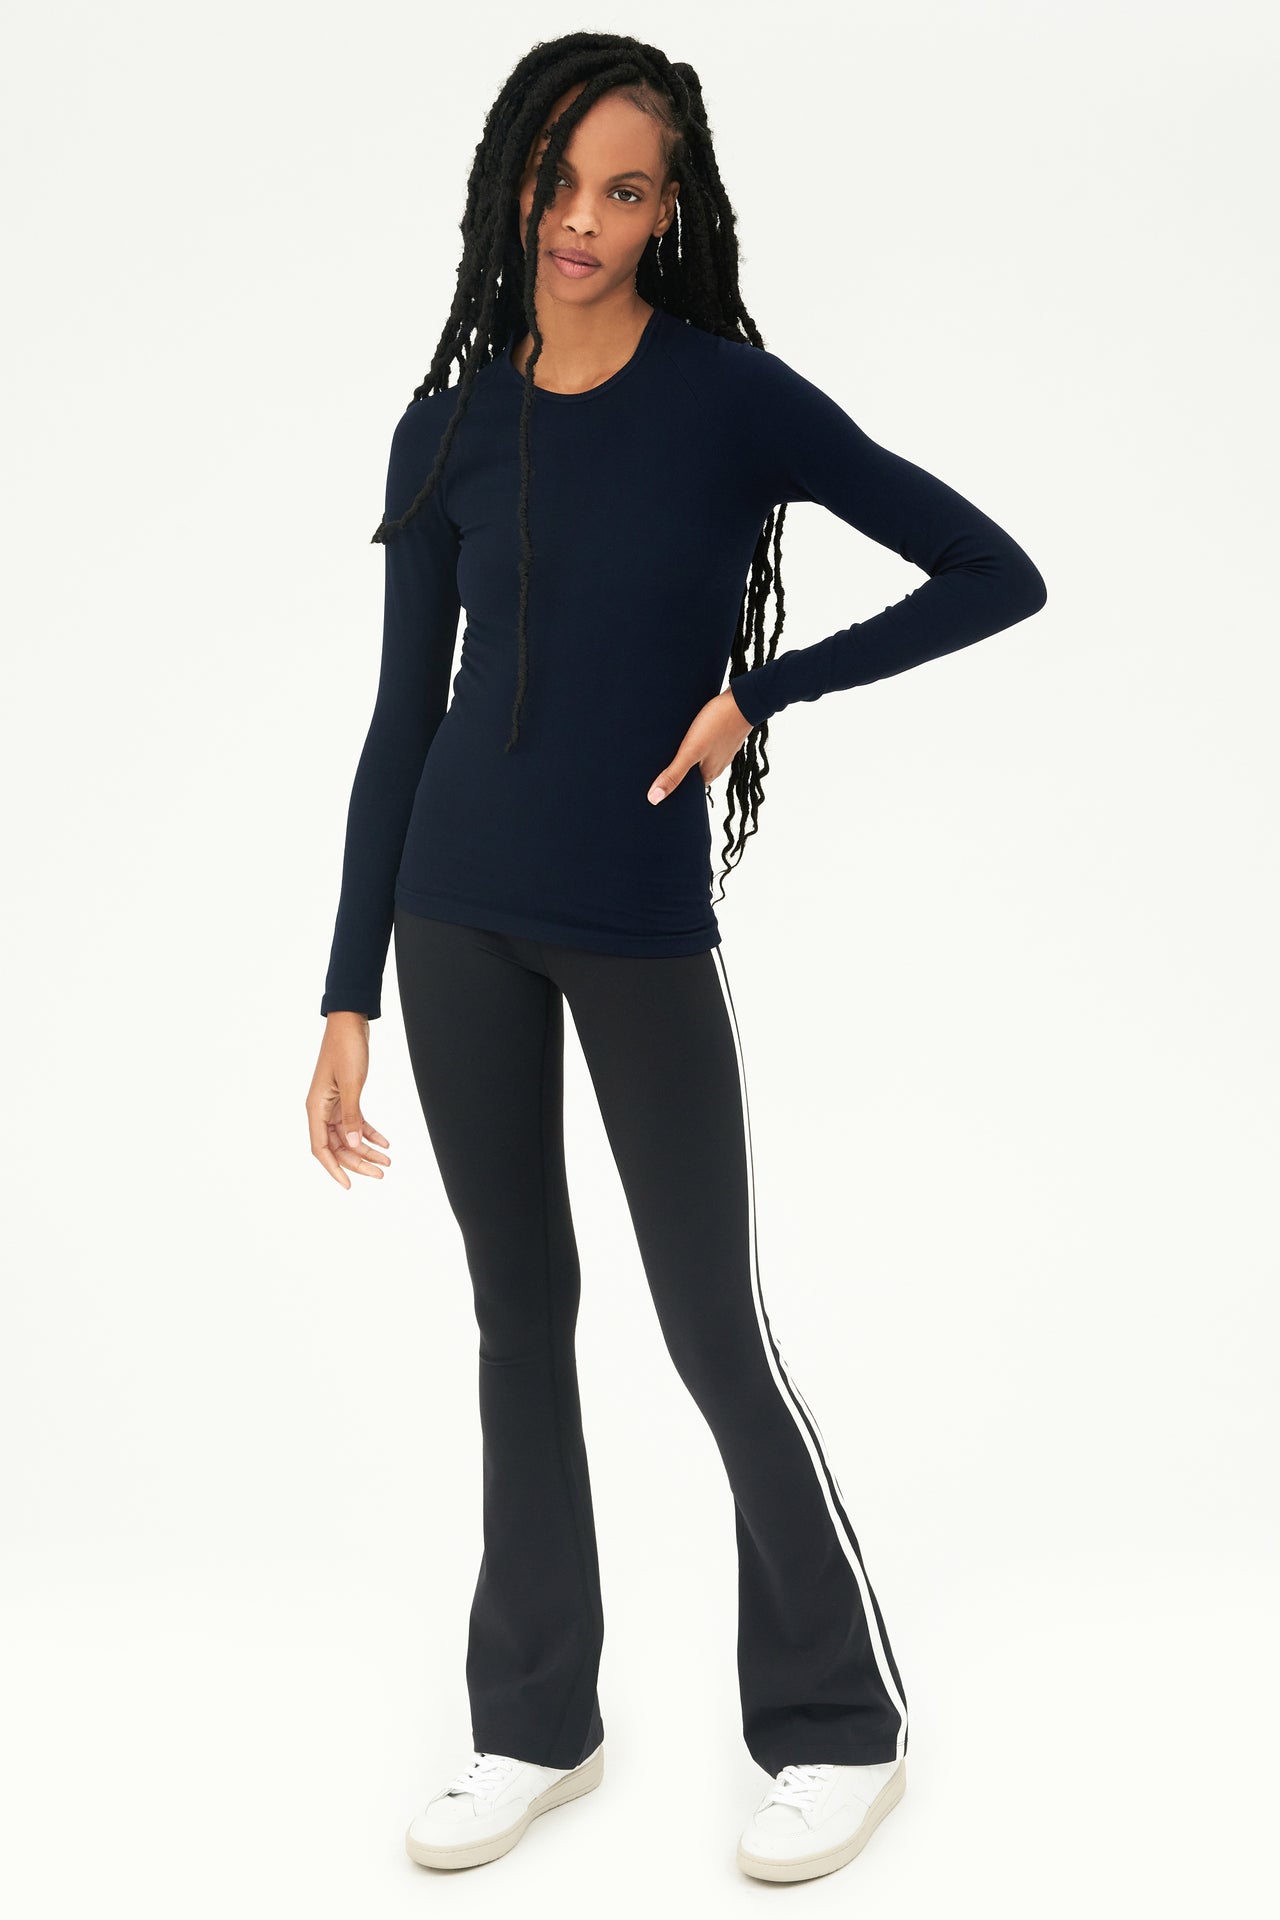 A young woman wearing a SPLITS59 Loren Seamless L/S Tee in Indigo and black leggings designed for gym workouts.